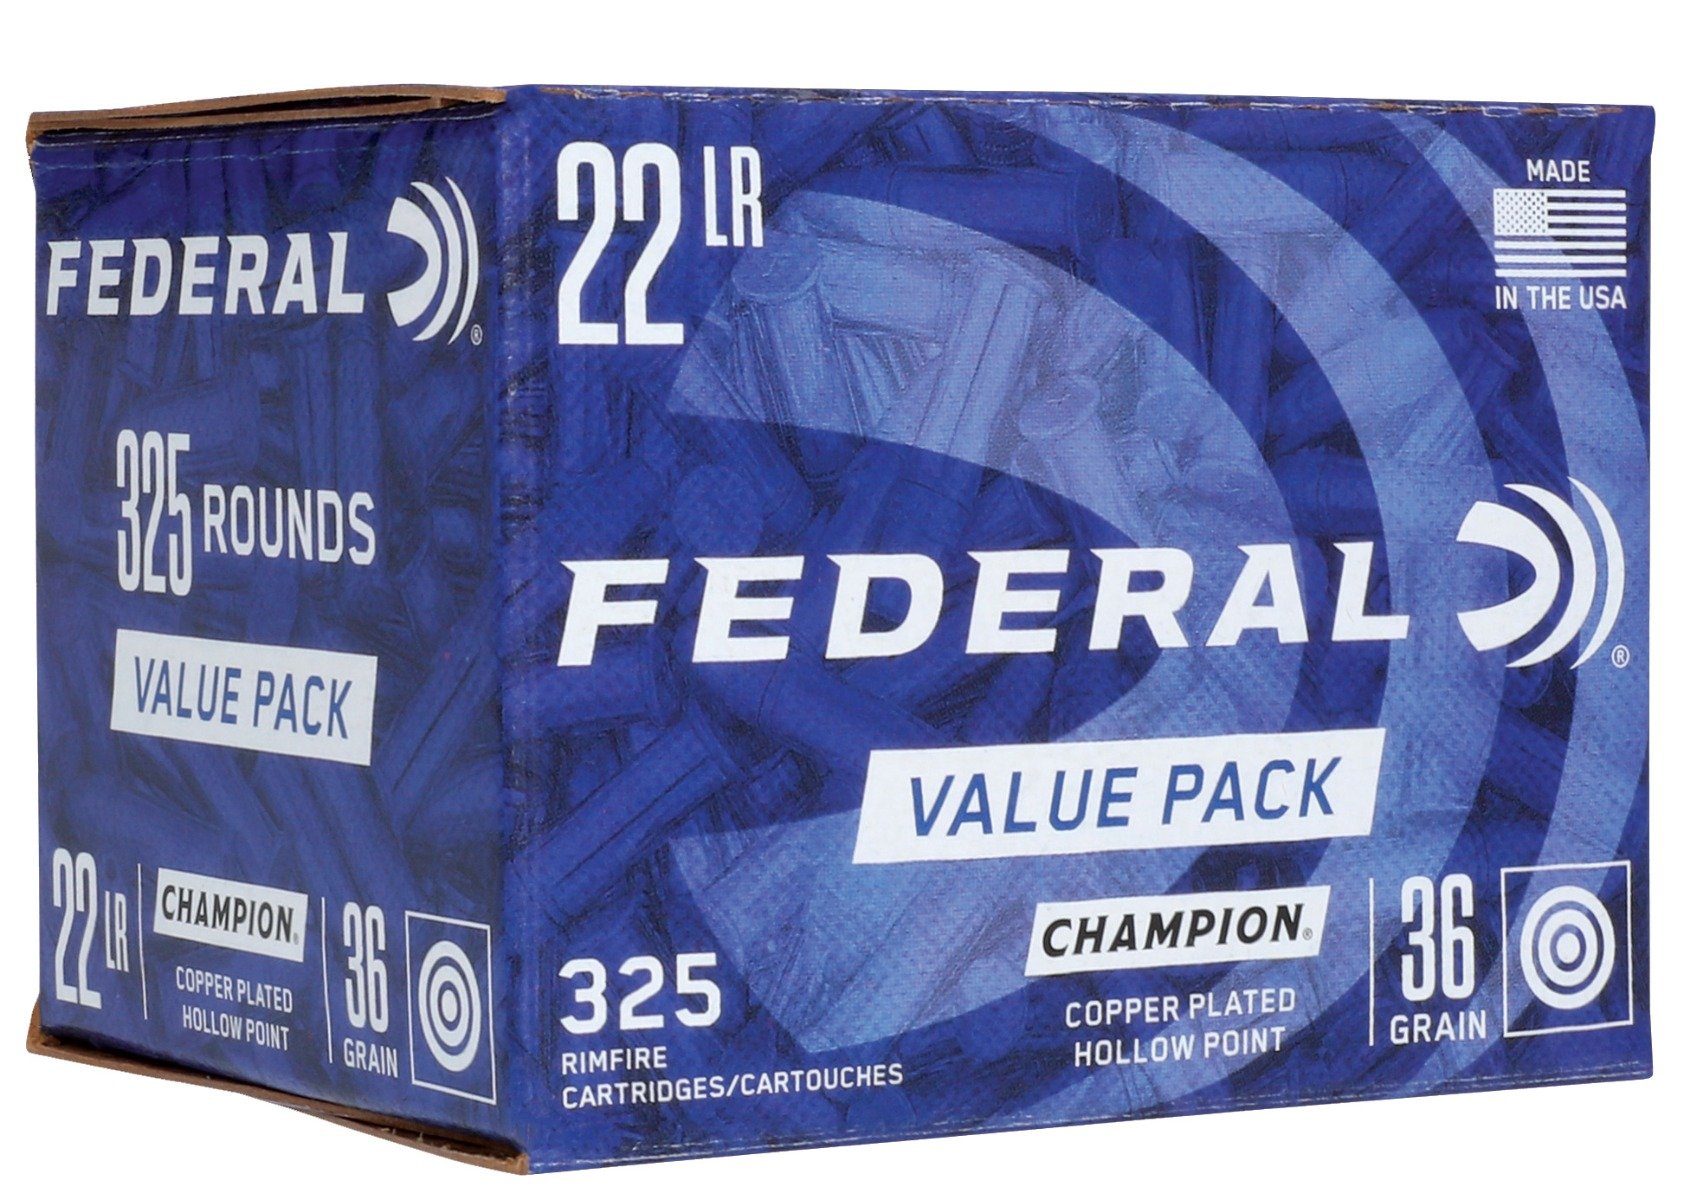 22 Lr Fed Copper Plated 36 Grain